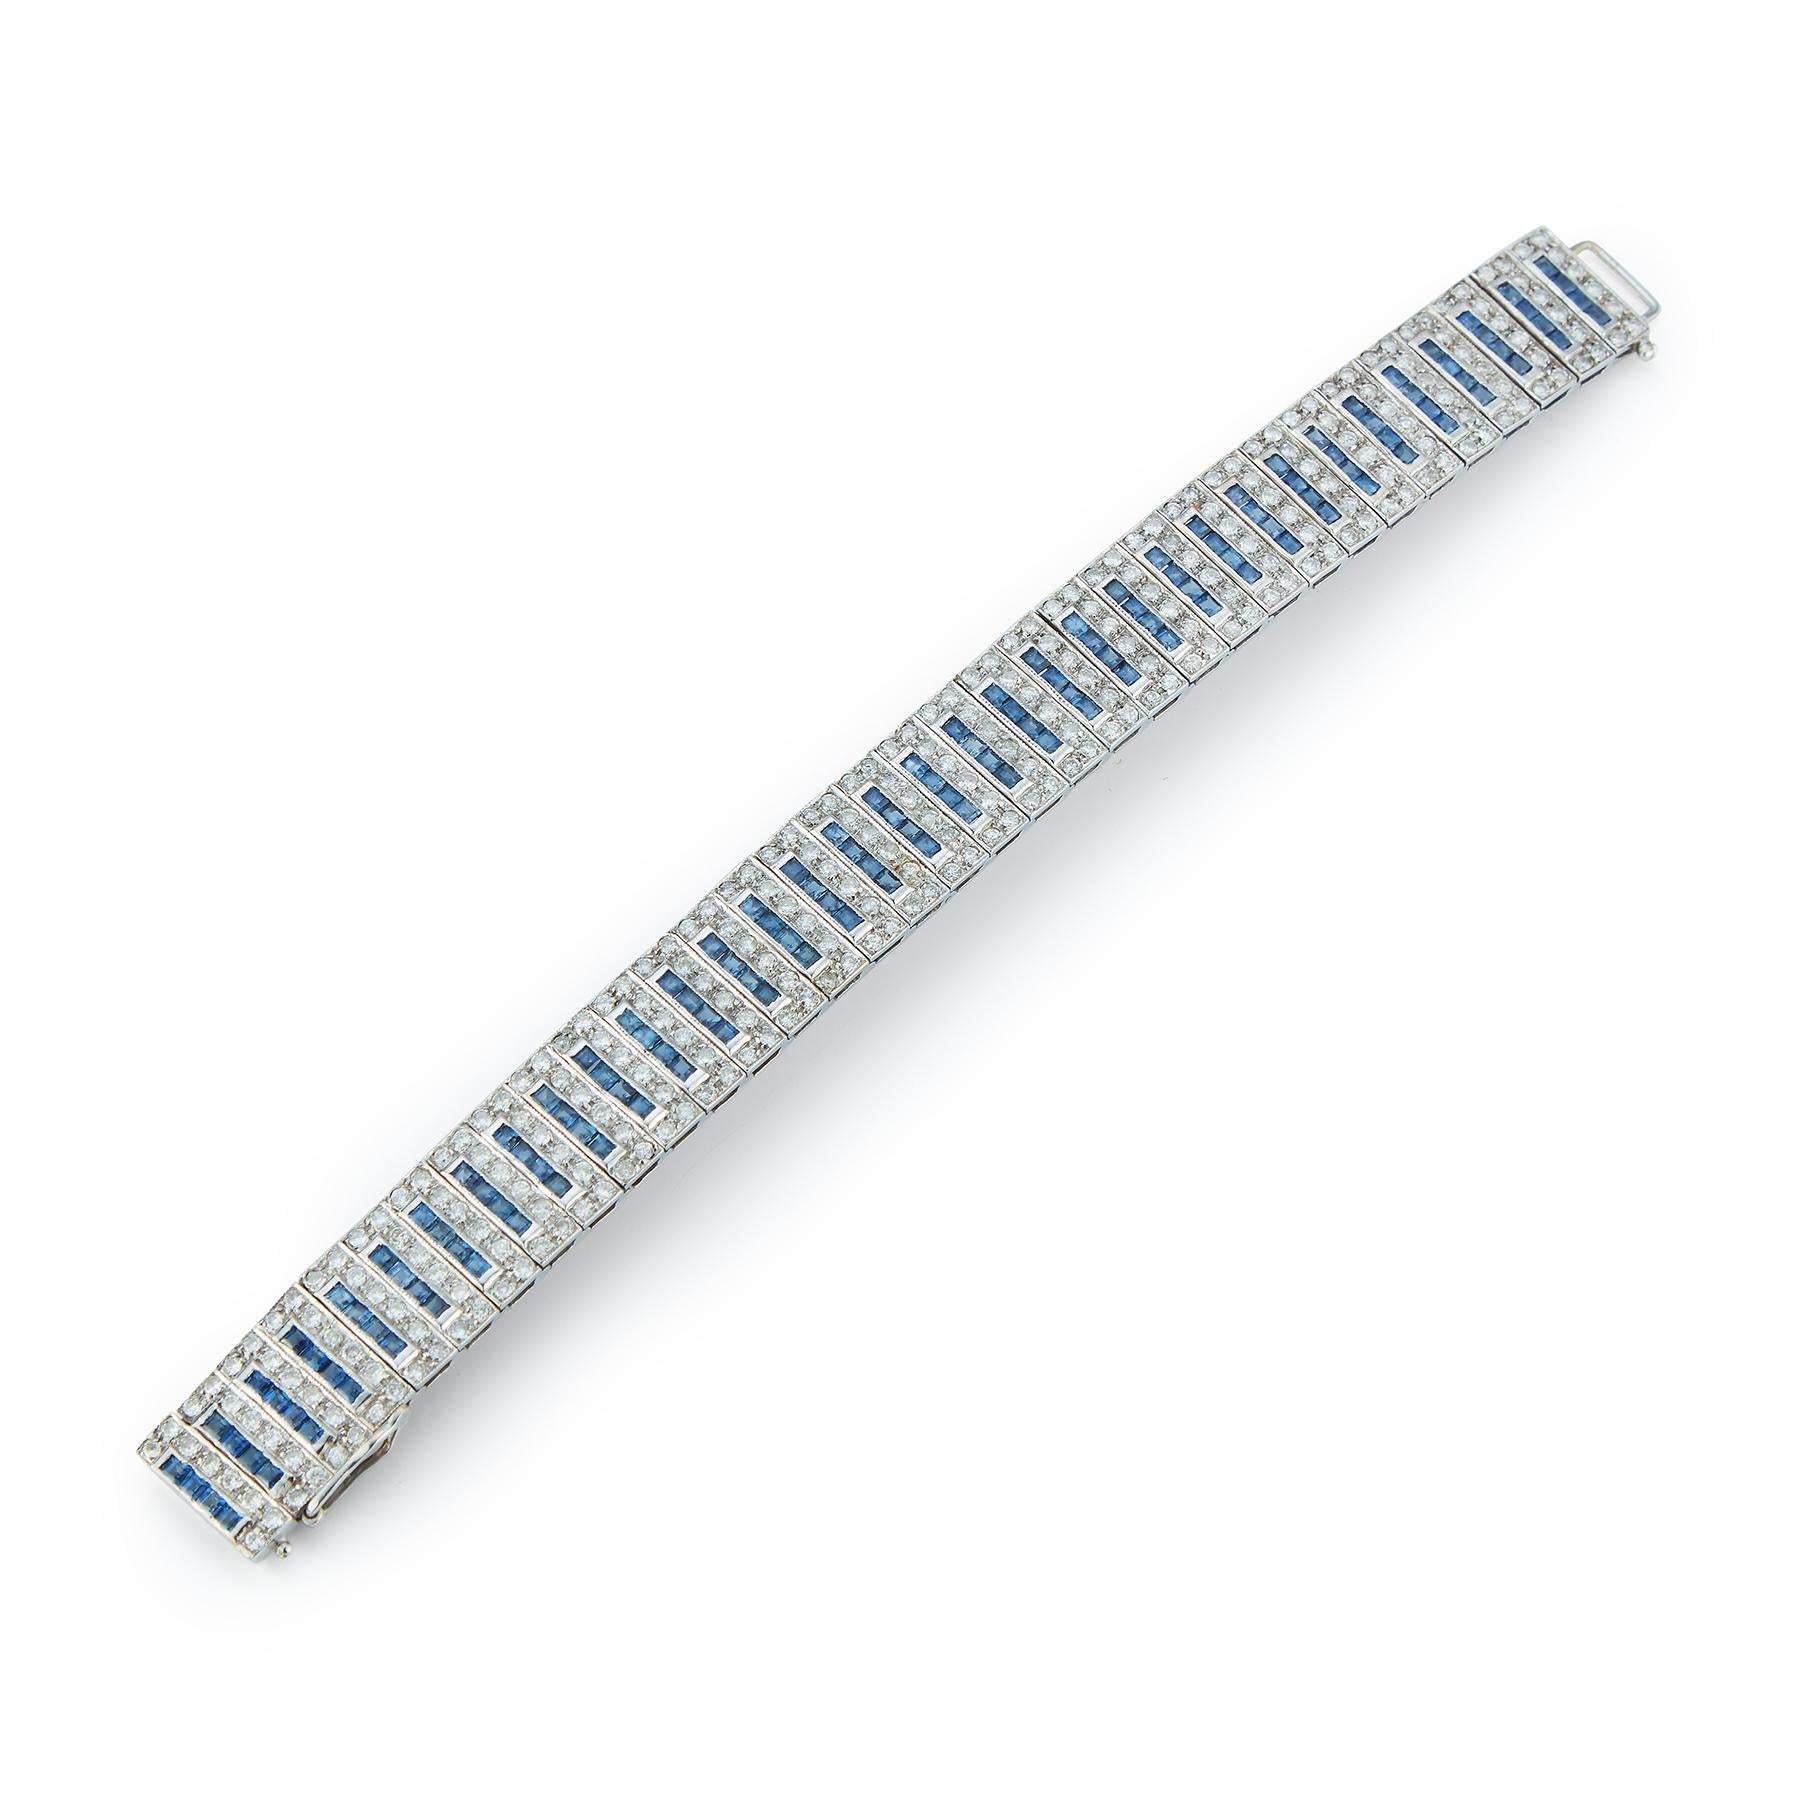 Sapphire and Diamond Bracelet

280 round cut diamonds approximately  7.30 cts & 140 square sapphires approximately 9.85 cts 

Set in 14k white gold 

Measurements: 6.5